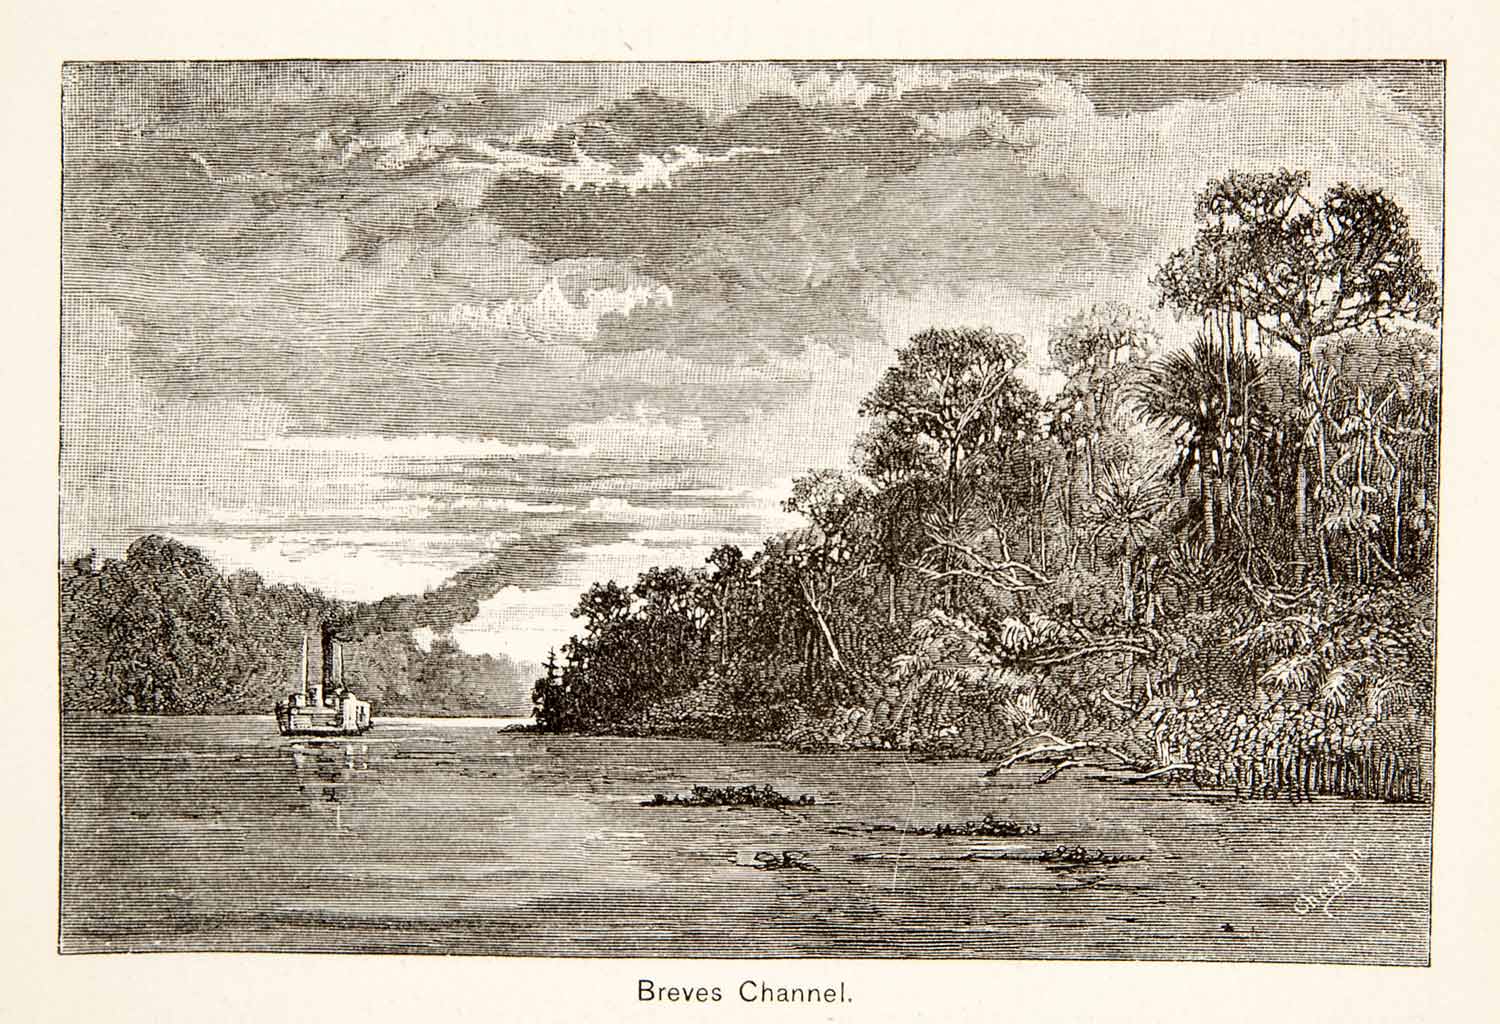 1879 Wood Engraving Breves Channel Brazil Waterway James Wells Champney XGNB4